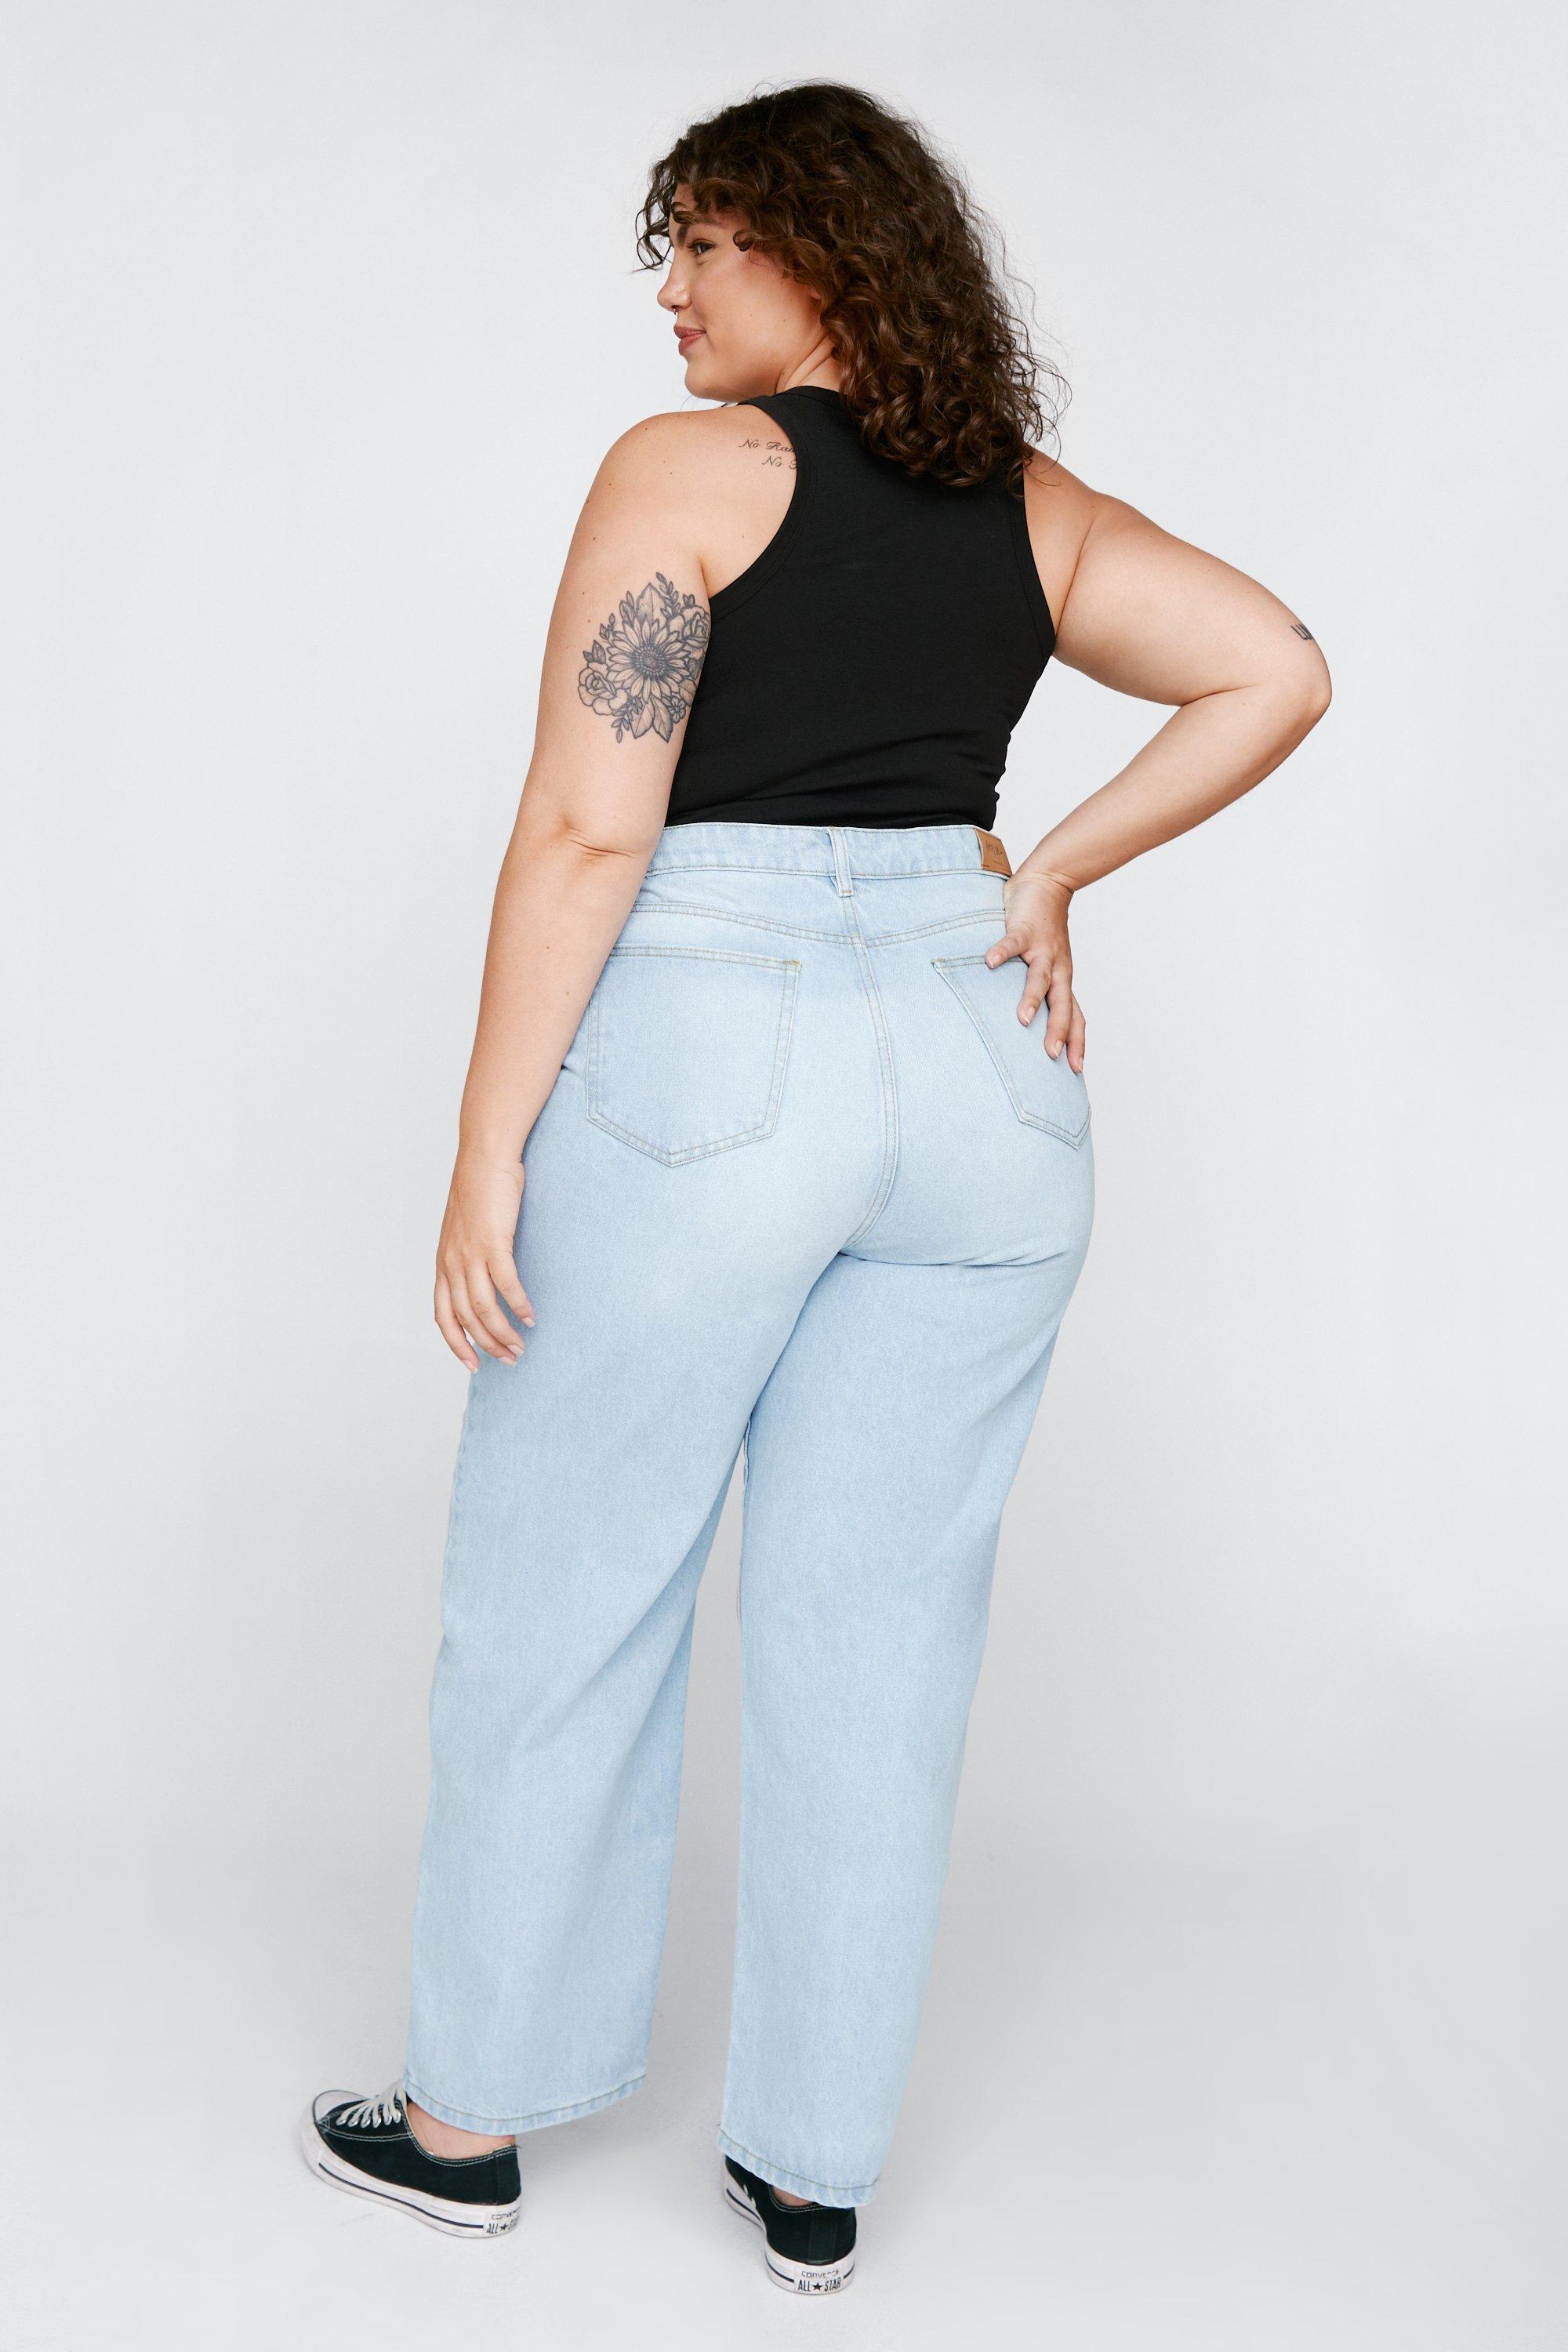 3 Chic Ways to Style Mom Jeans - Sequins & Sales